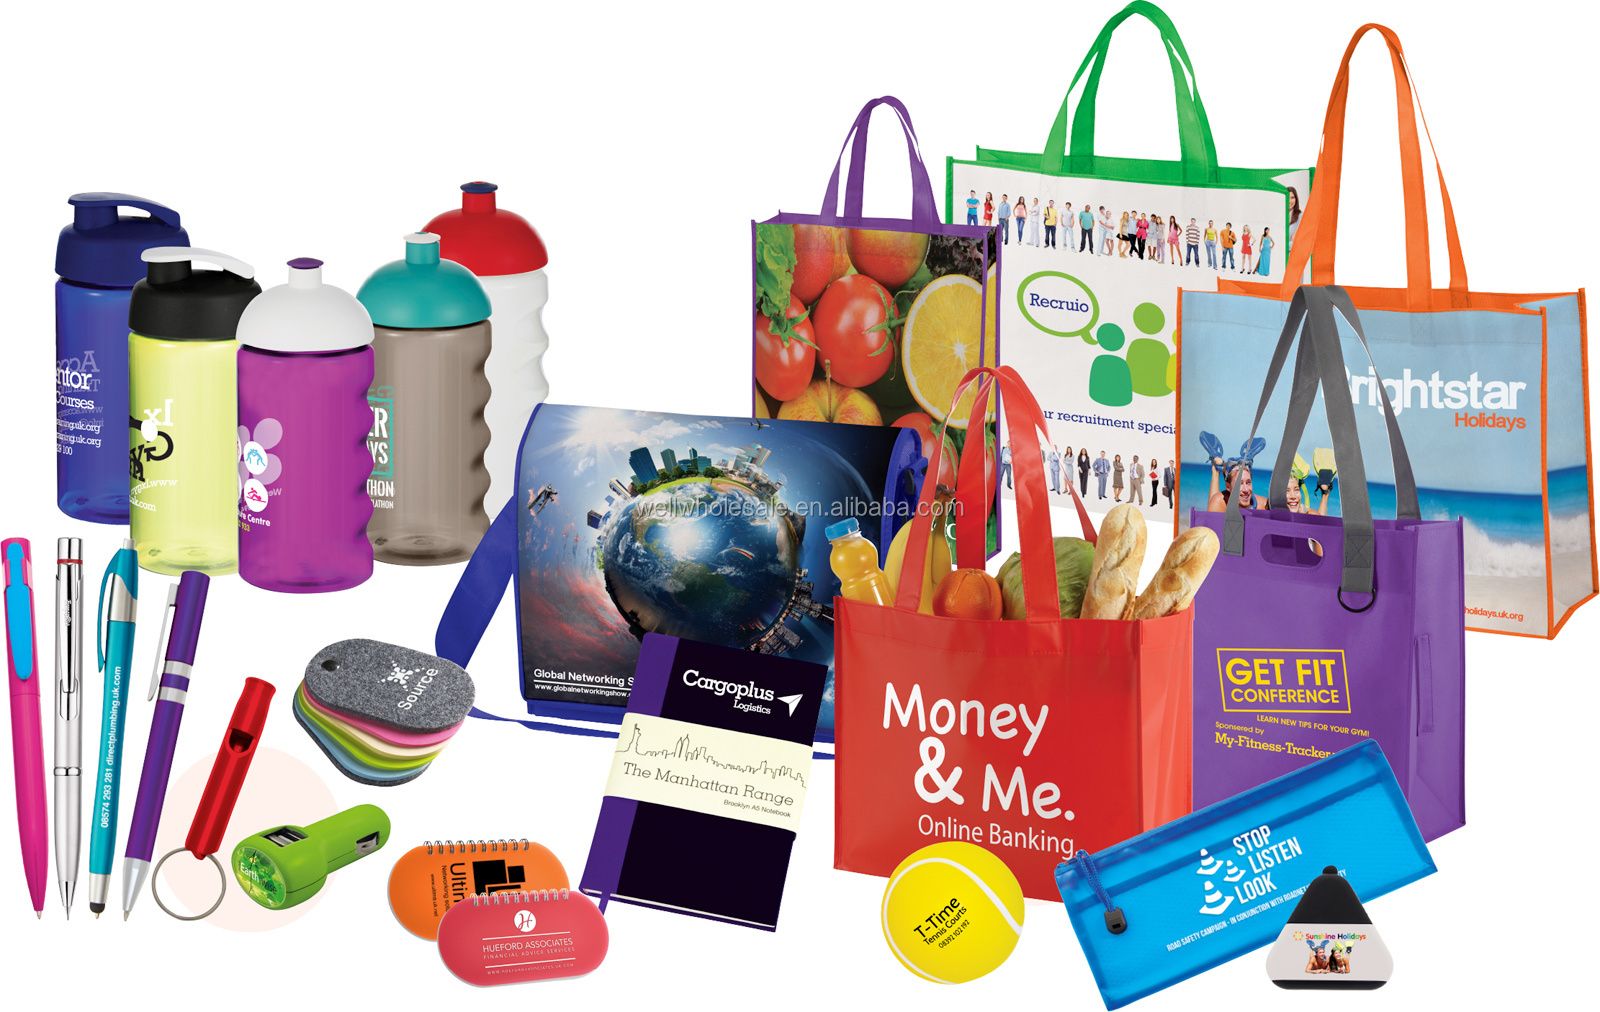 Easy bulk ordering for custom promotional products.